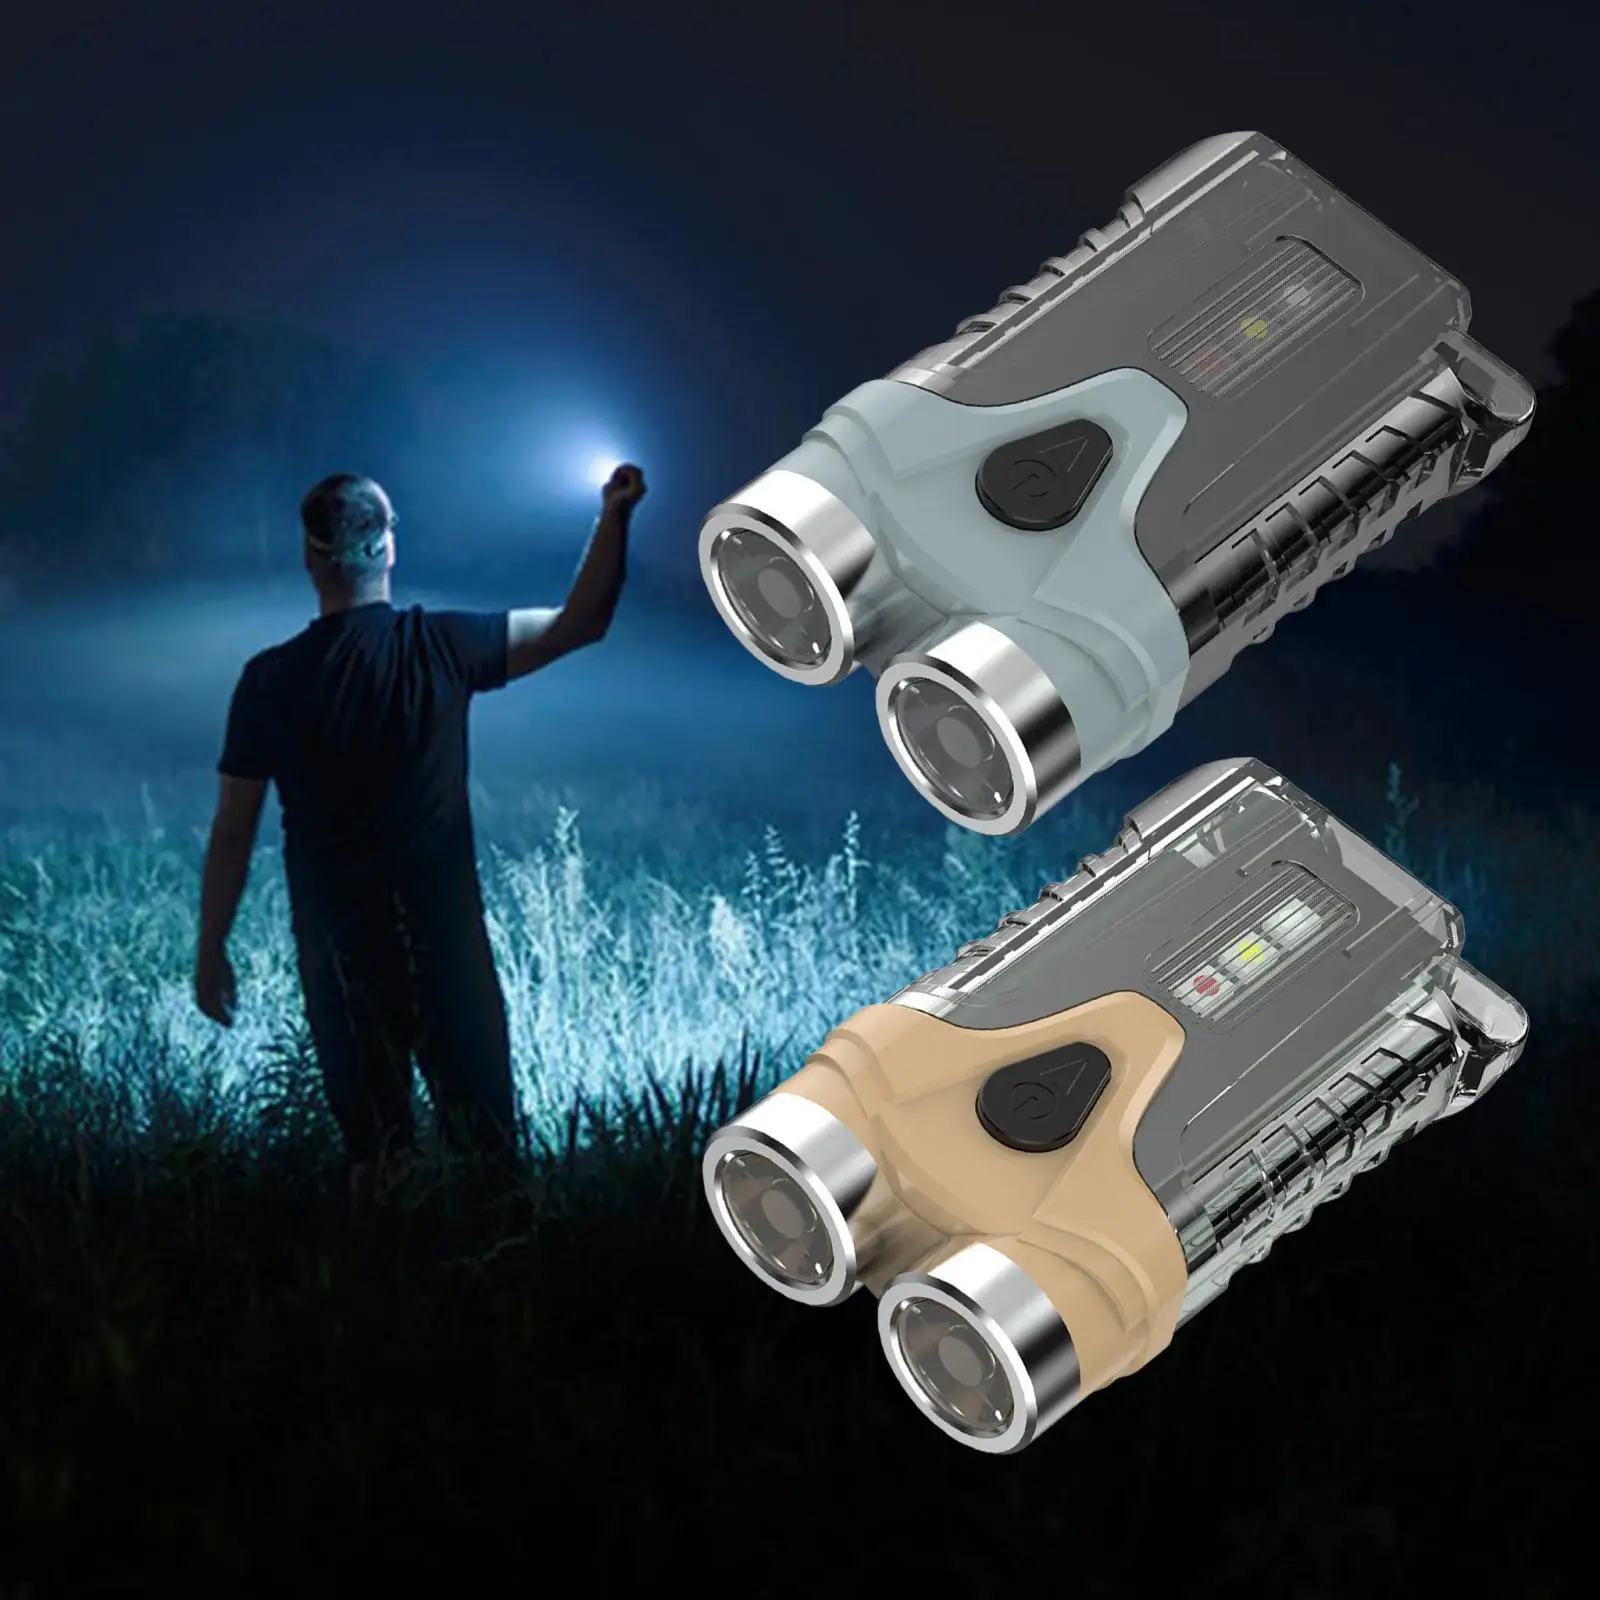 Keychain Flashlight Small Flash Light Handheld Torch for Hiking Home Working